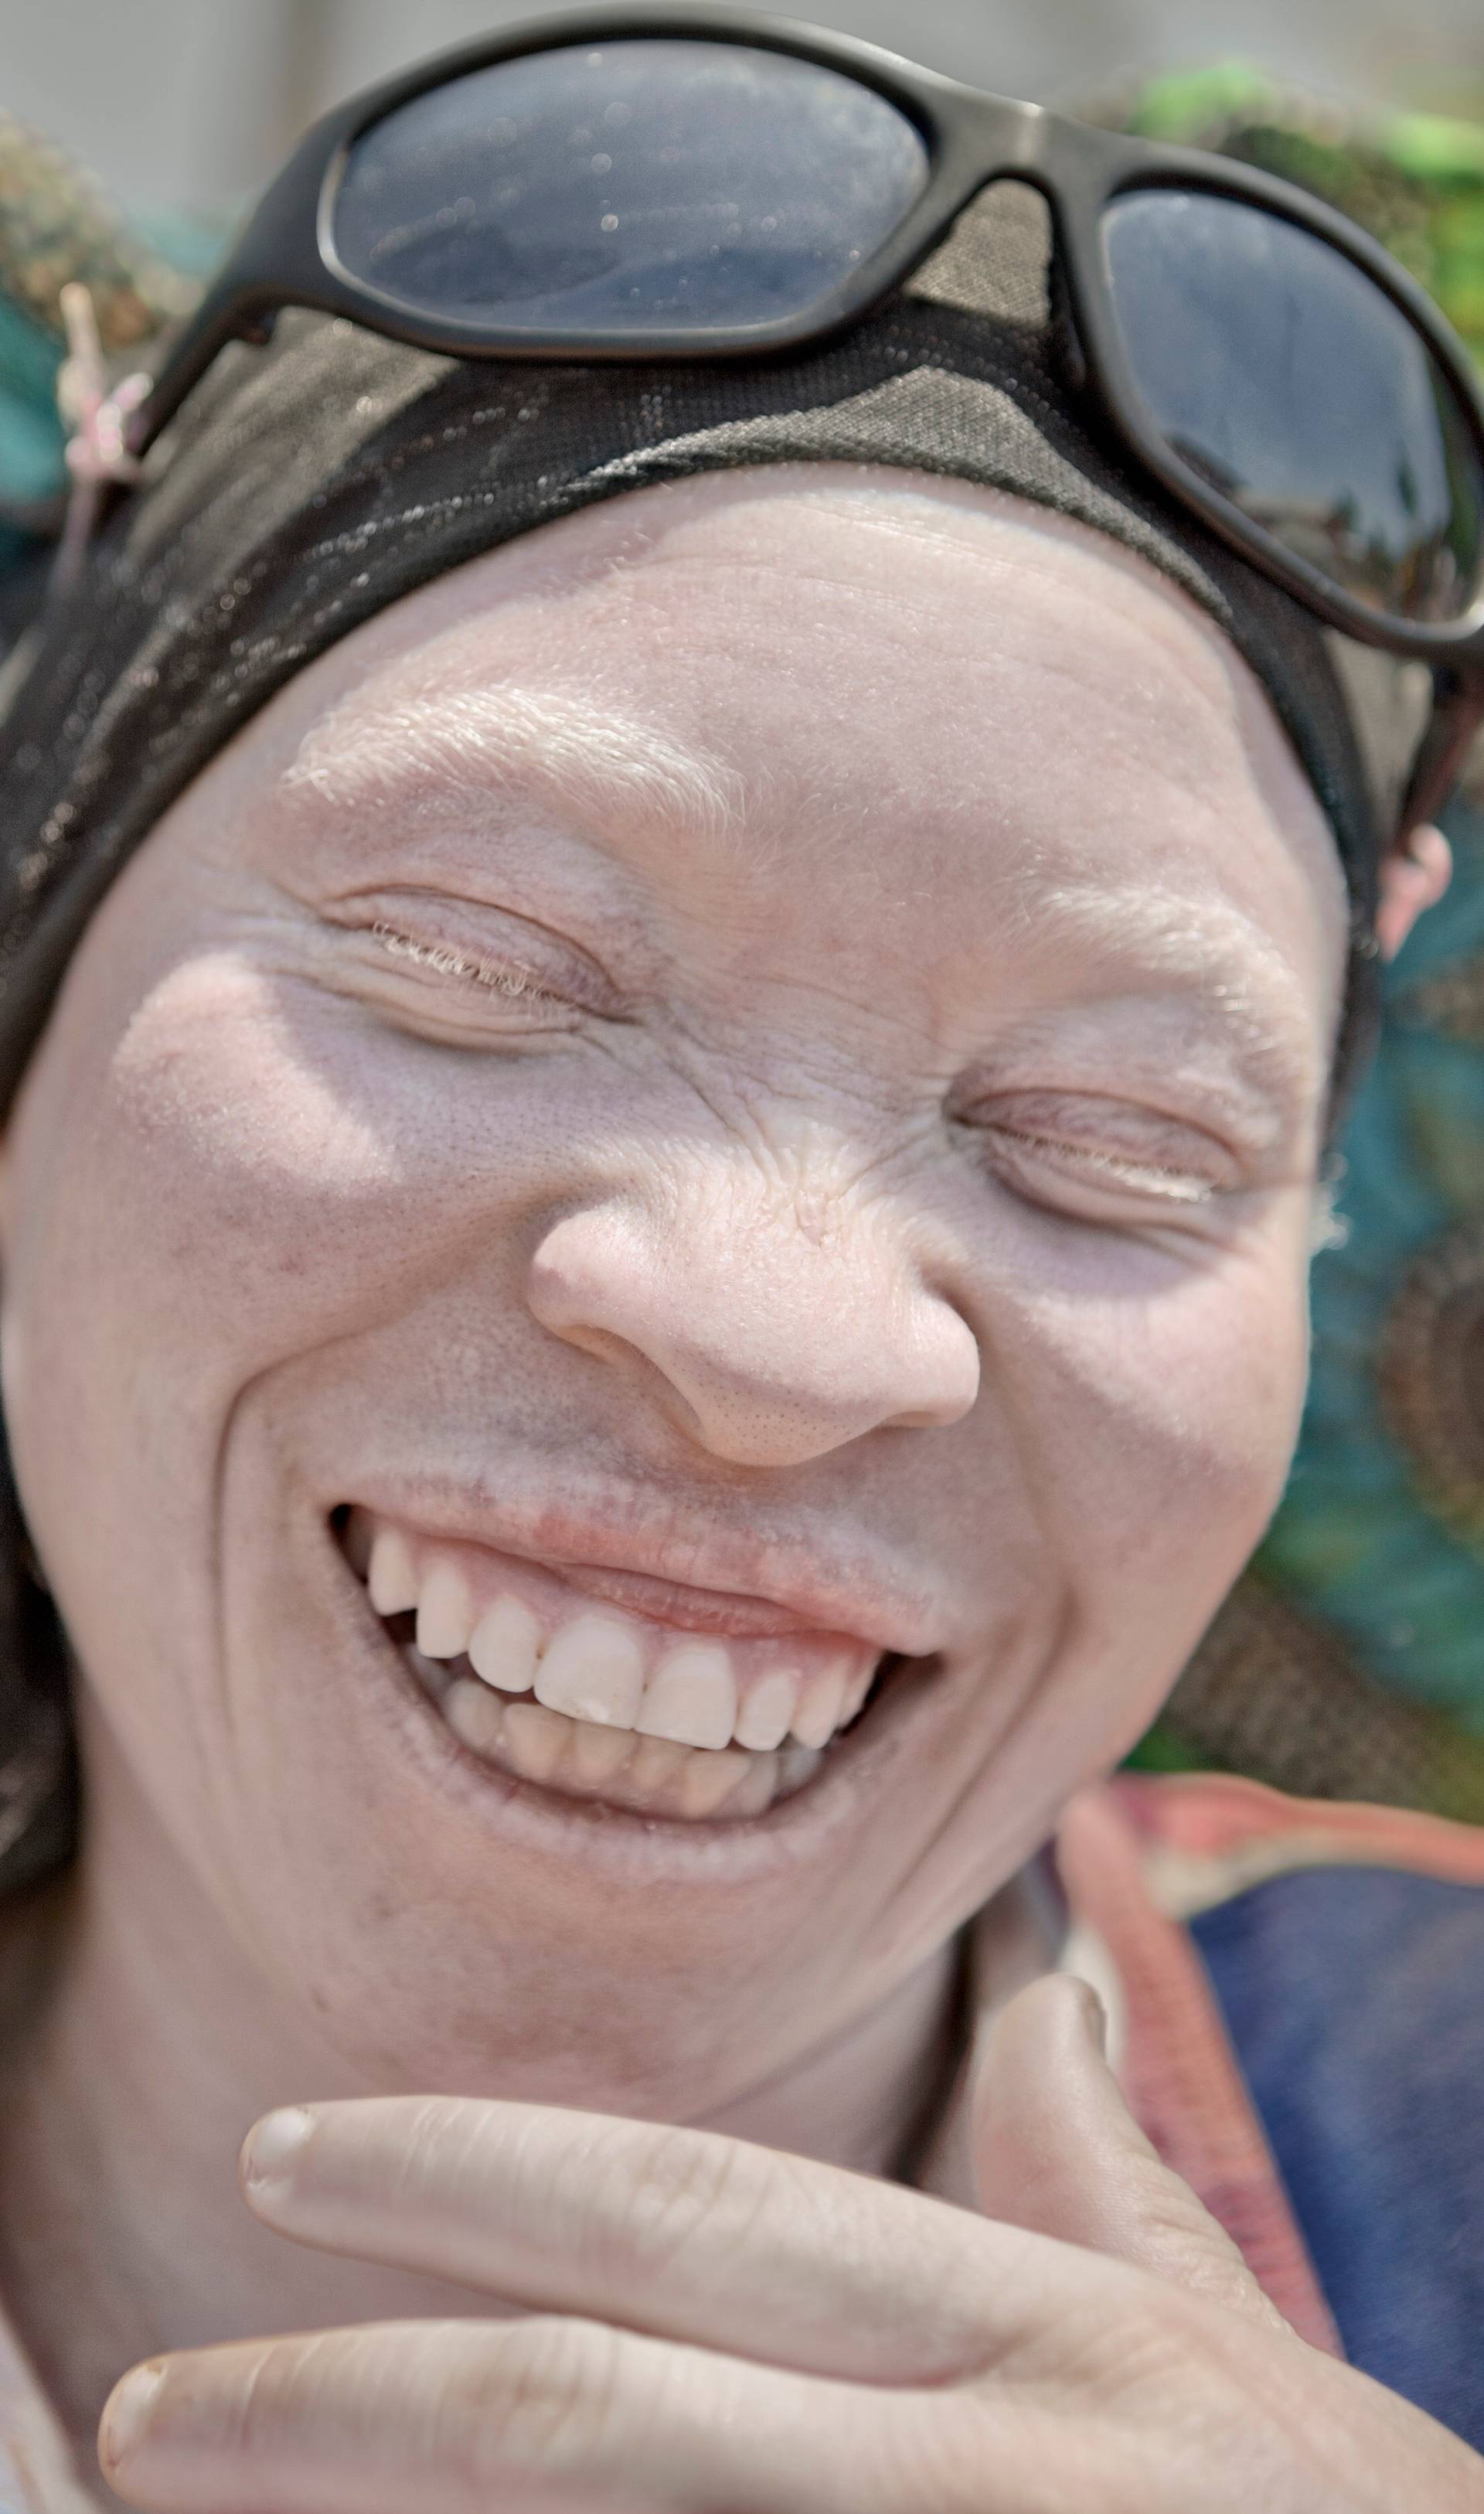 Persecuted: Albino People Seek Refuge From Vicious Body Part Traffickers